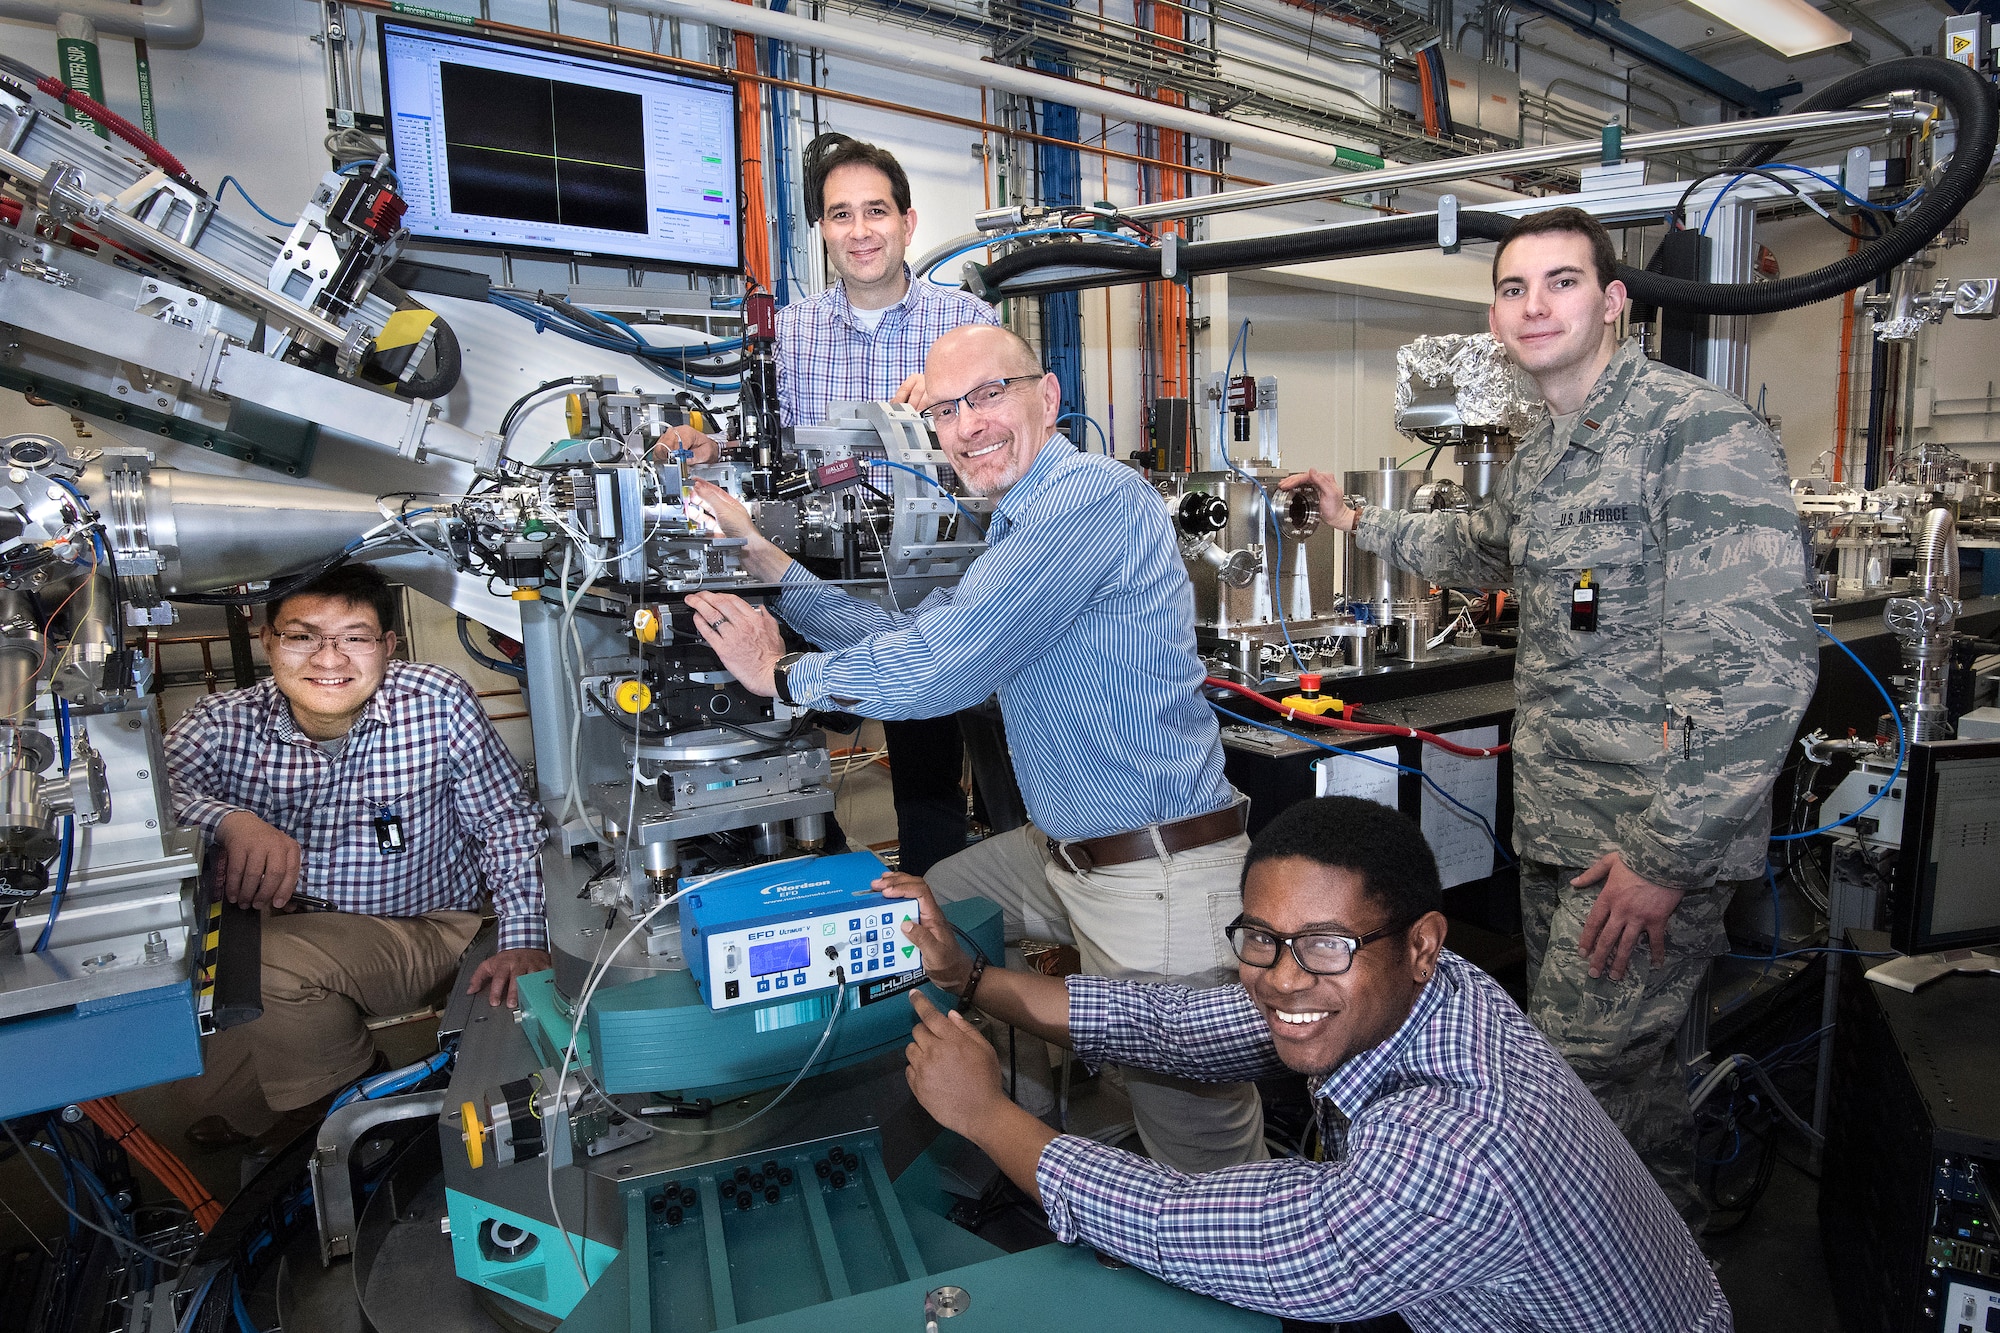 The Polymer Matrix Composites Materials and Processing research team used beamline instrumentation at Brookhaven National Laboratory to capture real-time imaging data of 3D-printed composite inks that could be used to produce aircraft structures in the future. (U.S. Air Force Photo/Hilmar Koerner)